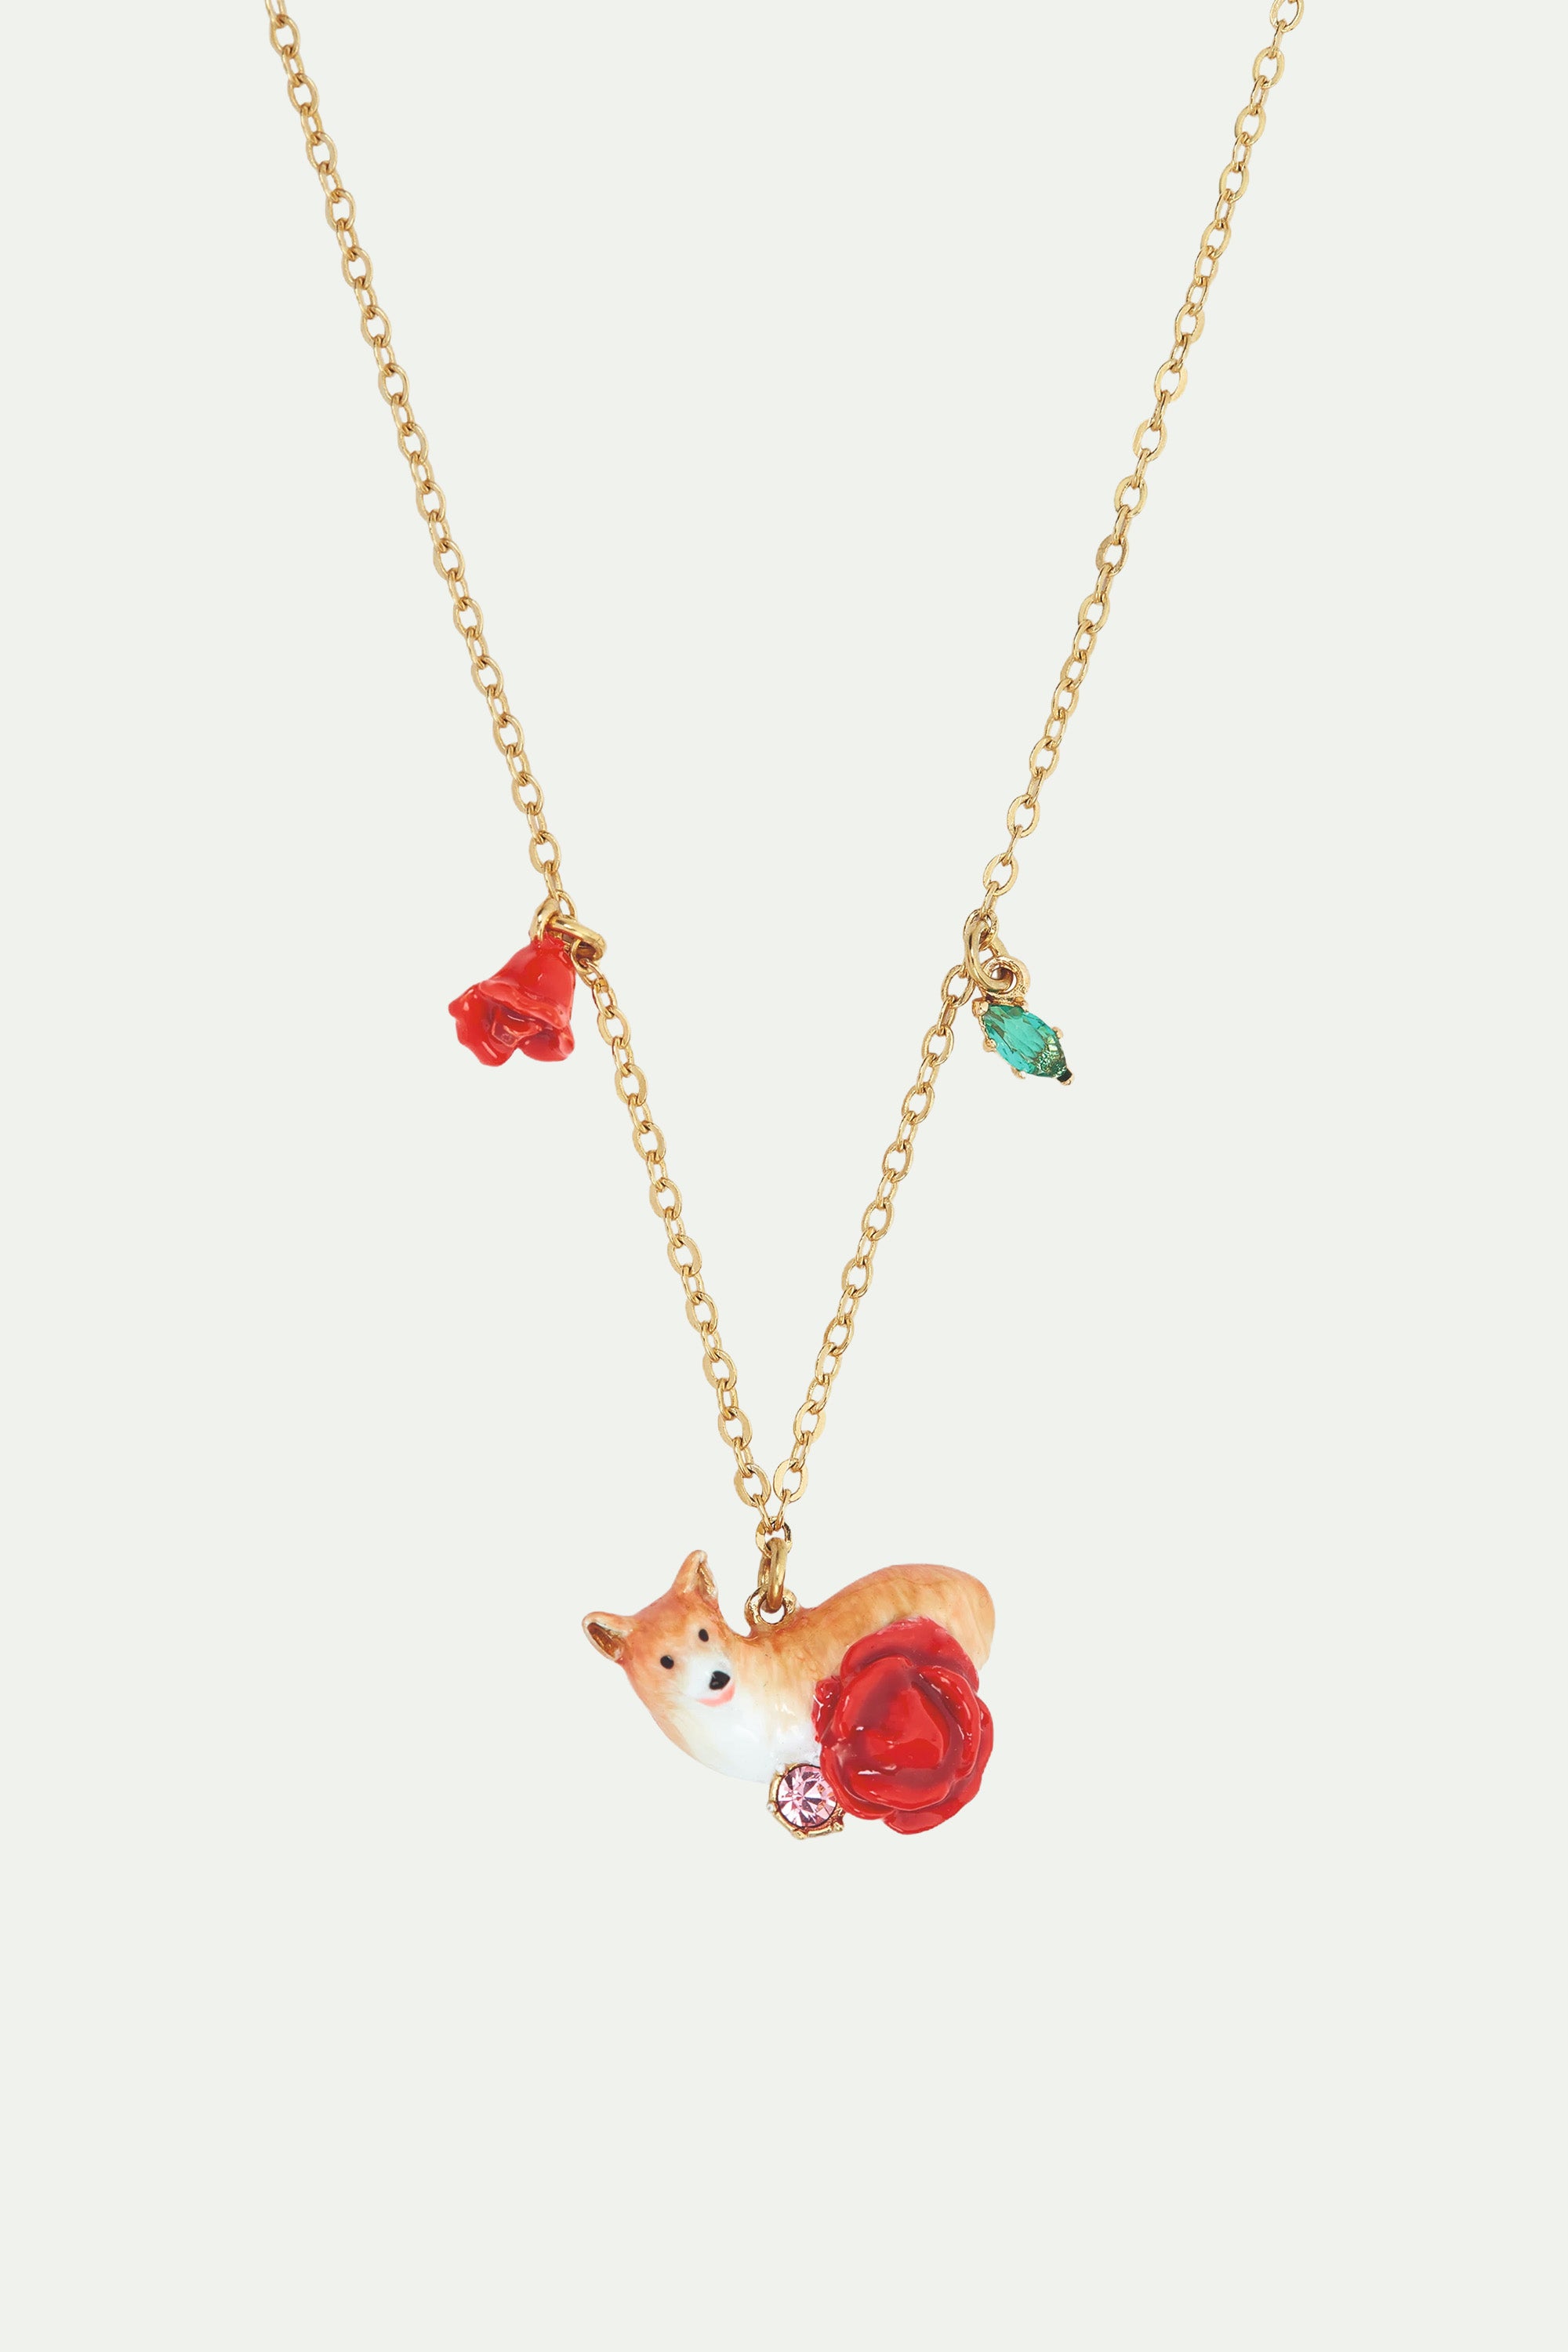 Corgi and red rose pendant necklace